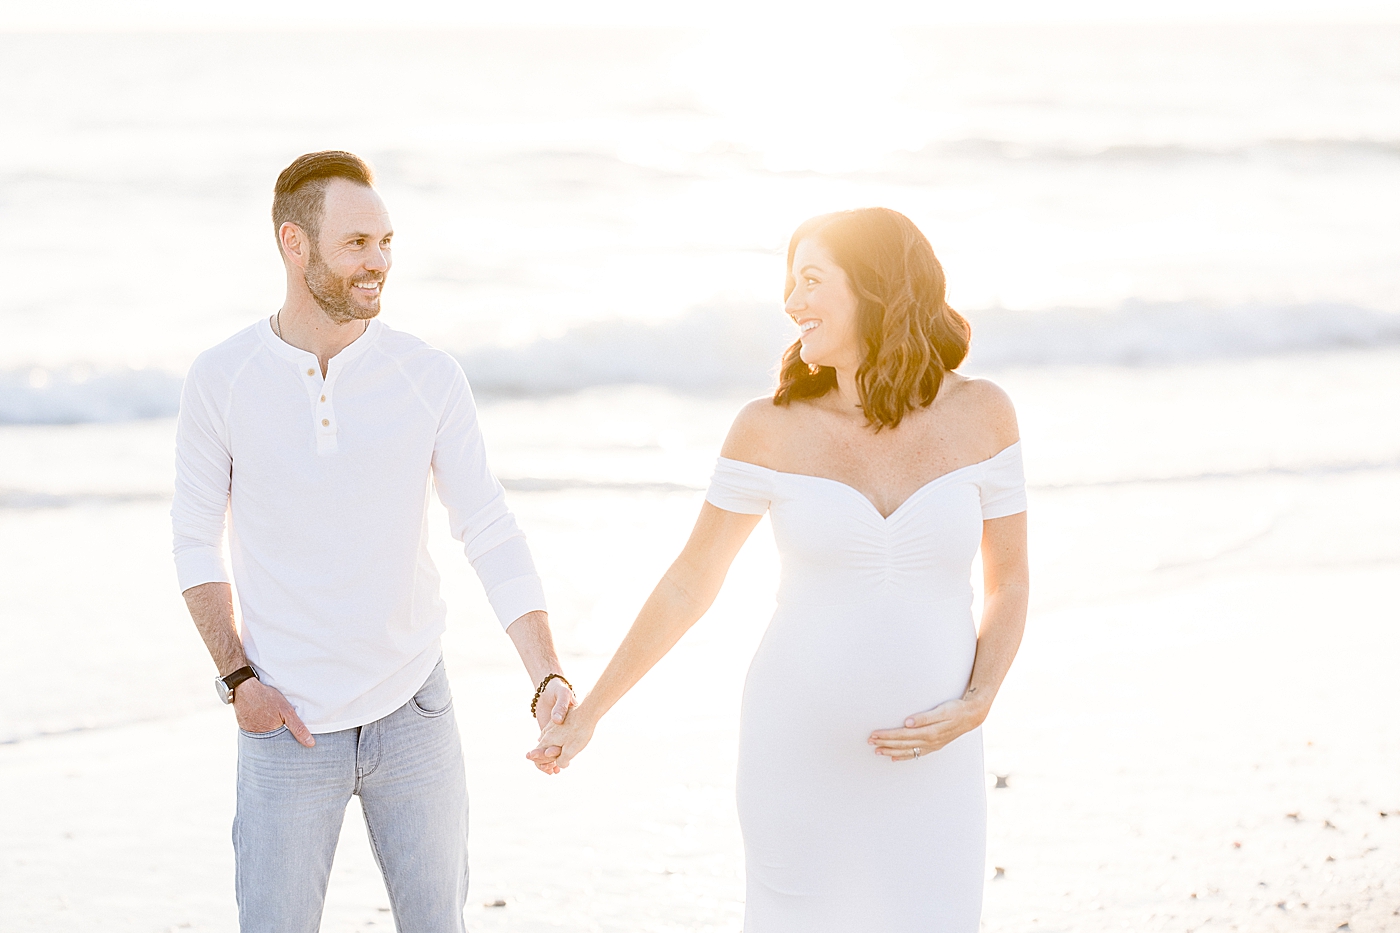 Sunset maternity session on the beach. Photo by Brittany Elise Photography.